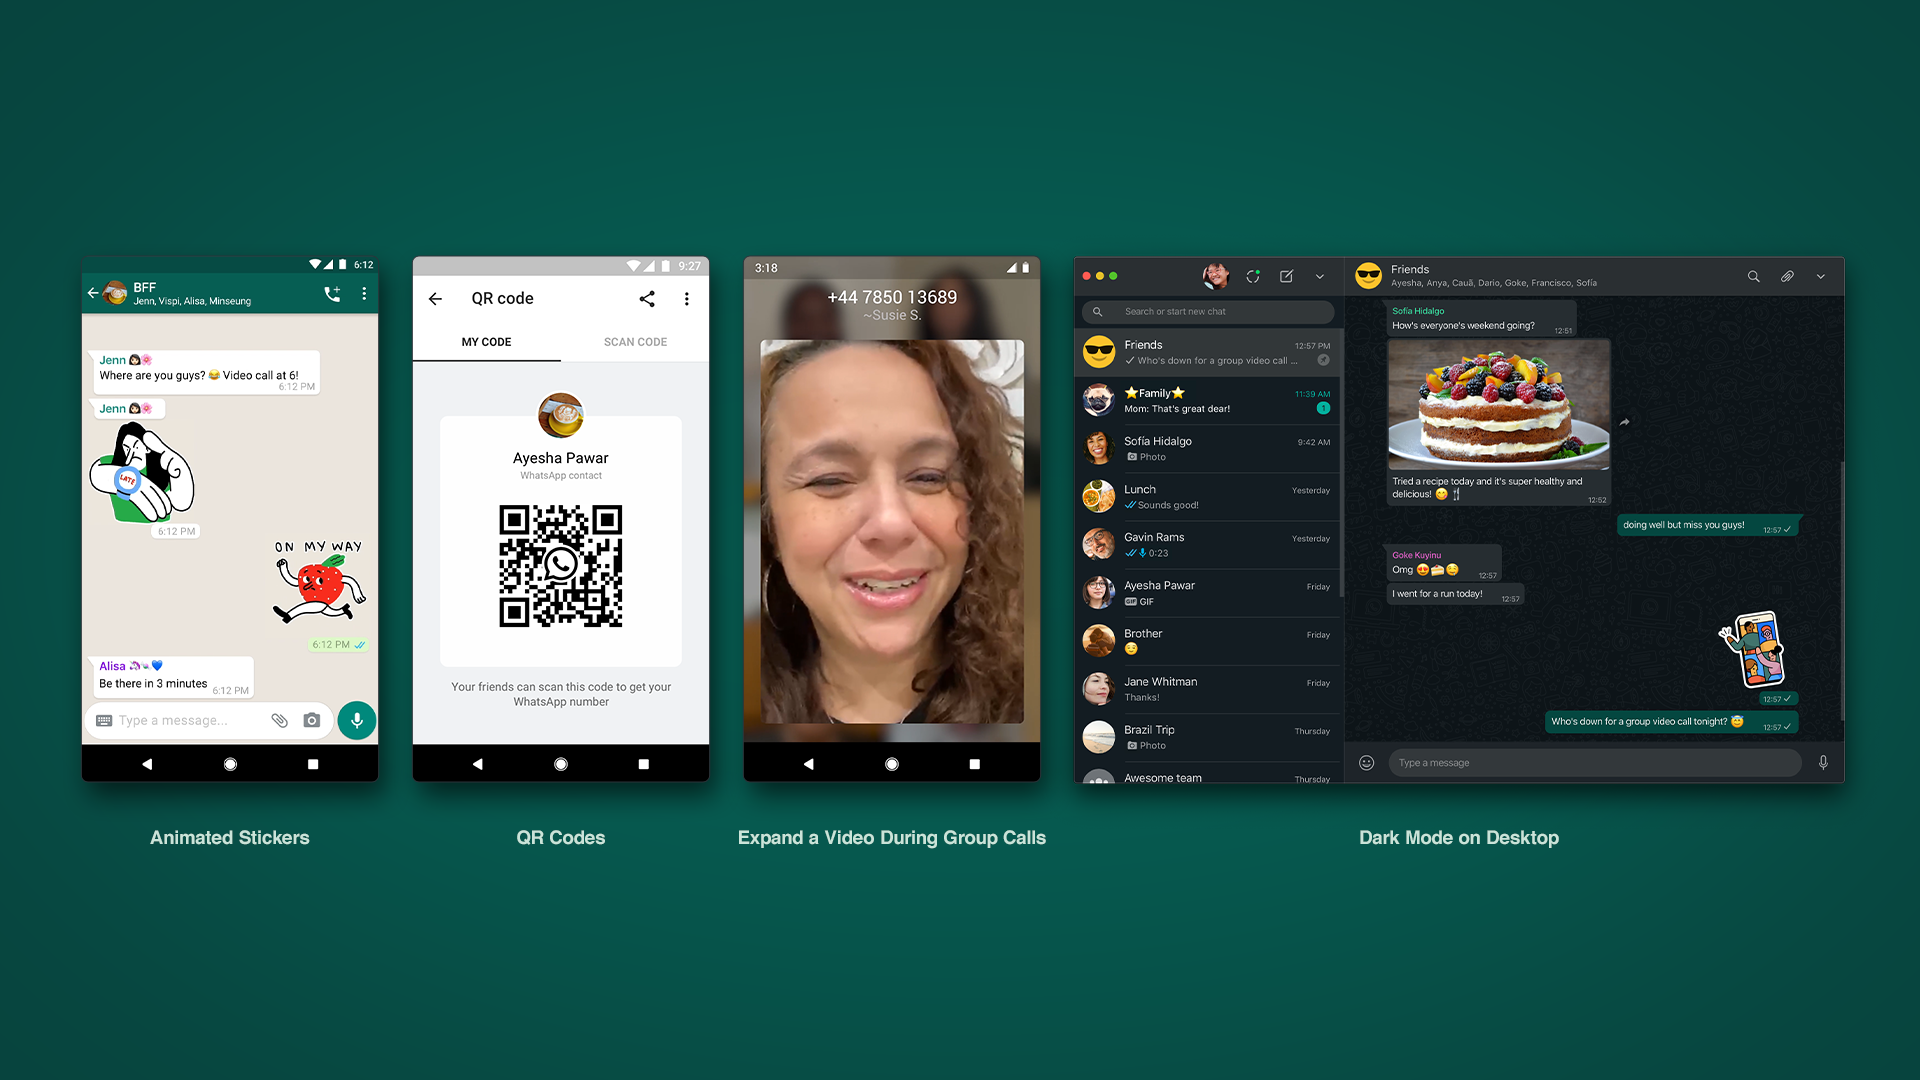 WhatsApp introduces animated stickers, QR code, dark mode for desktop and more in their latest update